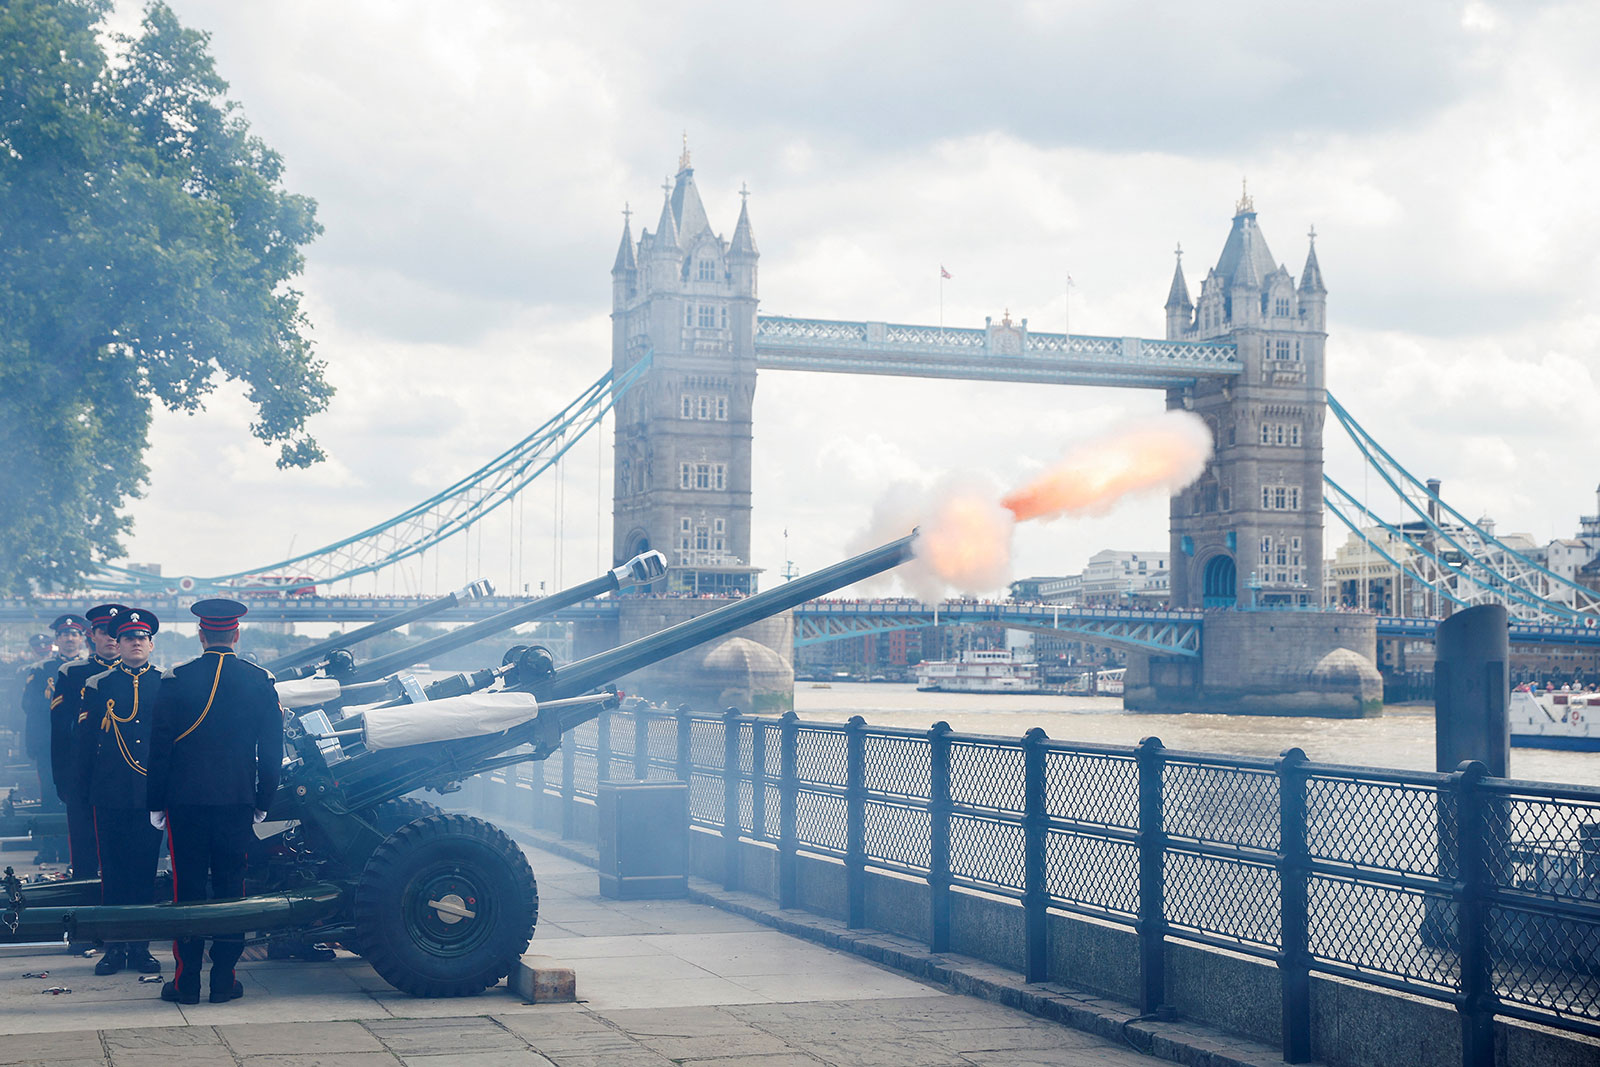 Members of the Honourable Artillery Company perform a gun salute at the Tower of London.